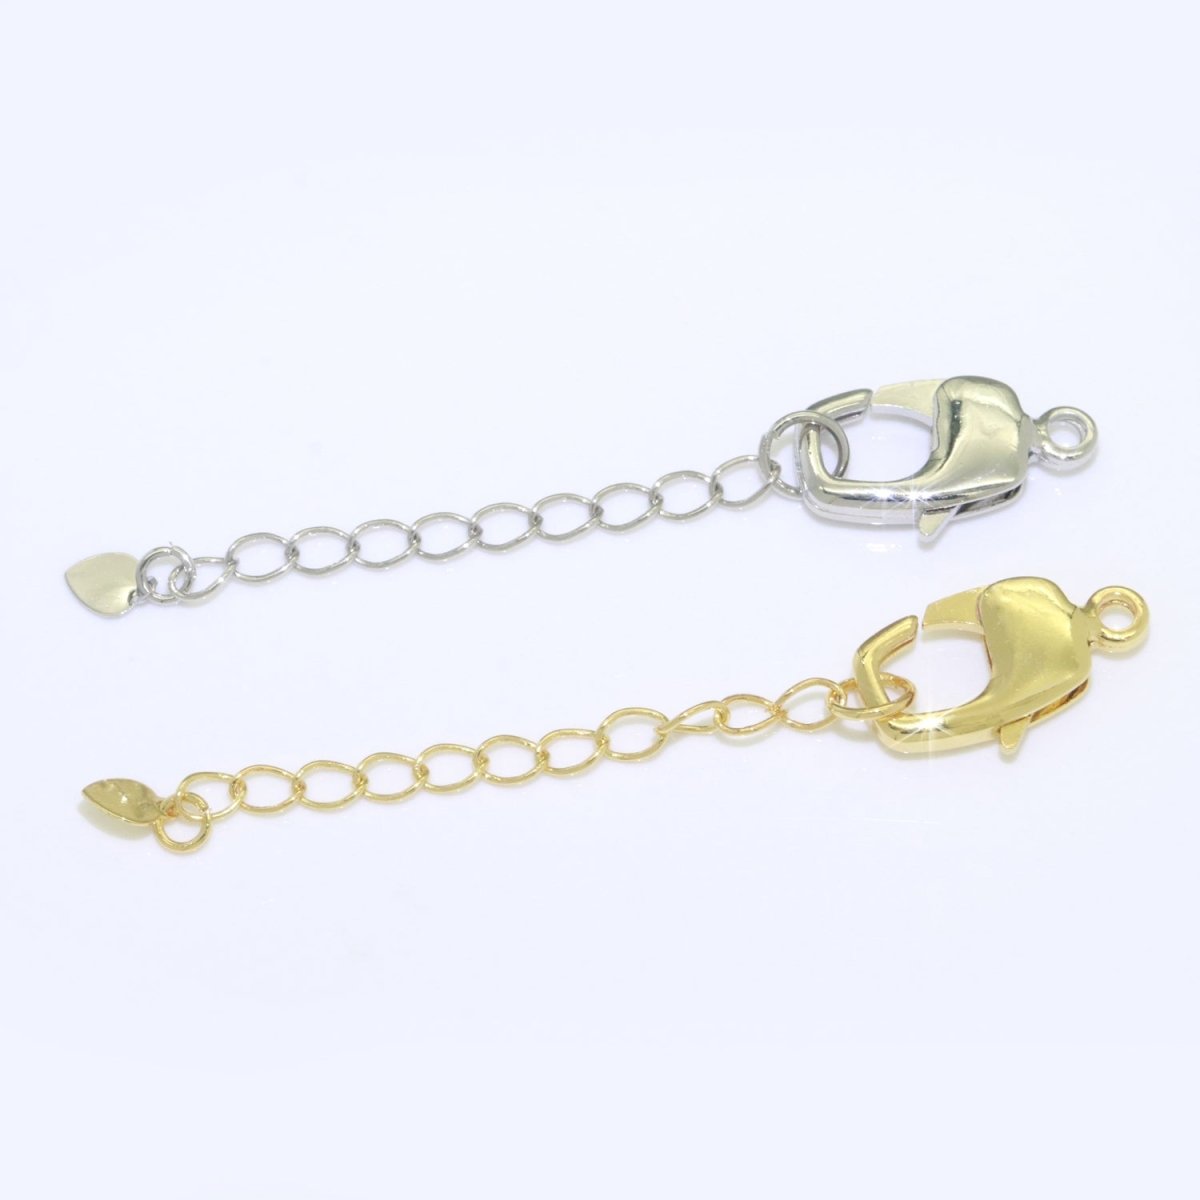 2.7 inch Gold Filled Chain Extender For Necklace Bracelet Supply Component Findings Extenders w/ Heart charm + Lobster Clasp L-506 L-507 - DLUXCA